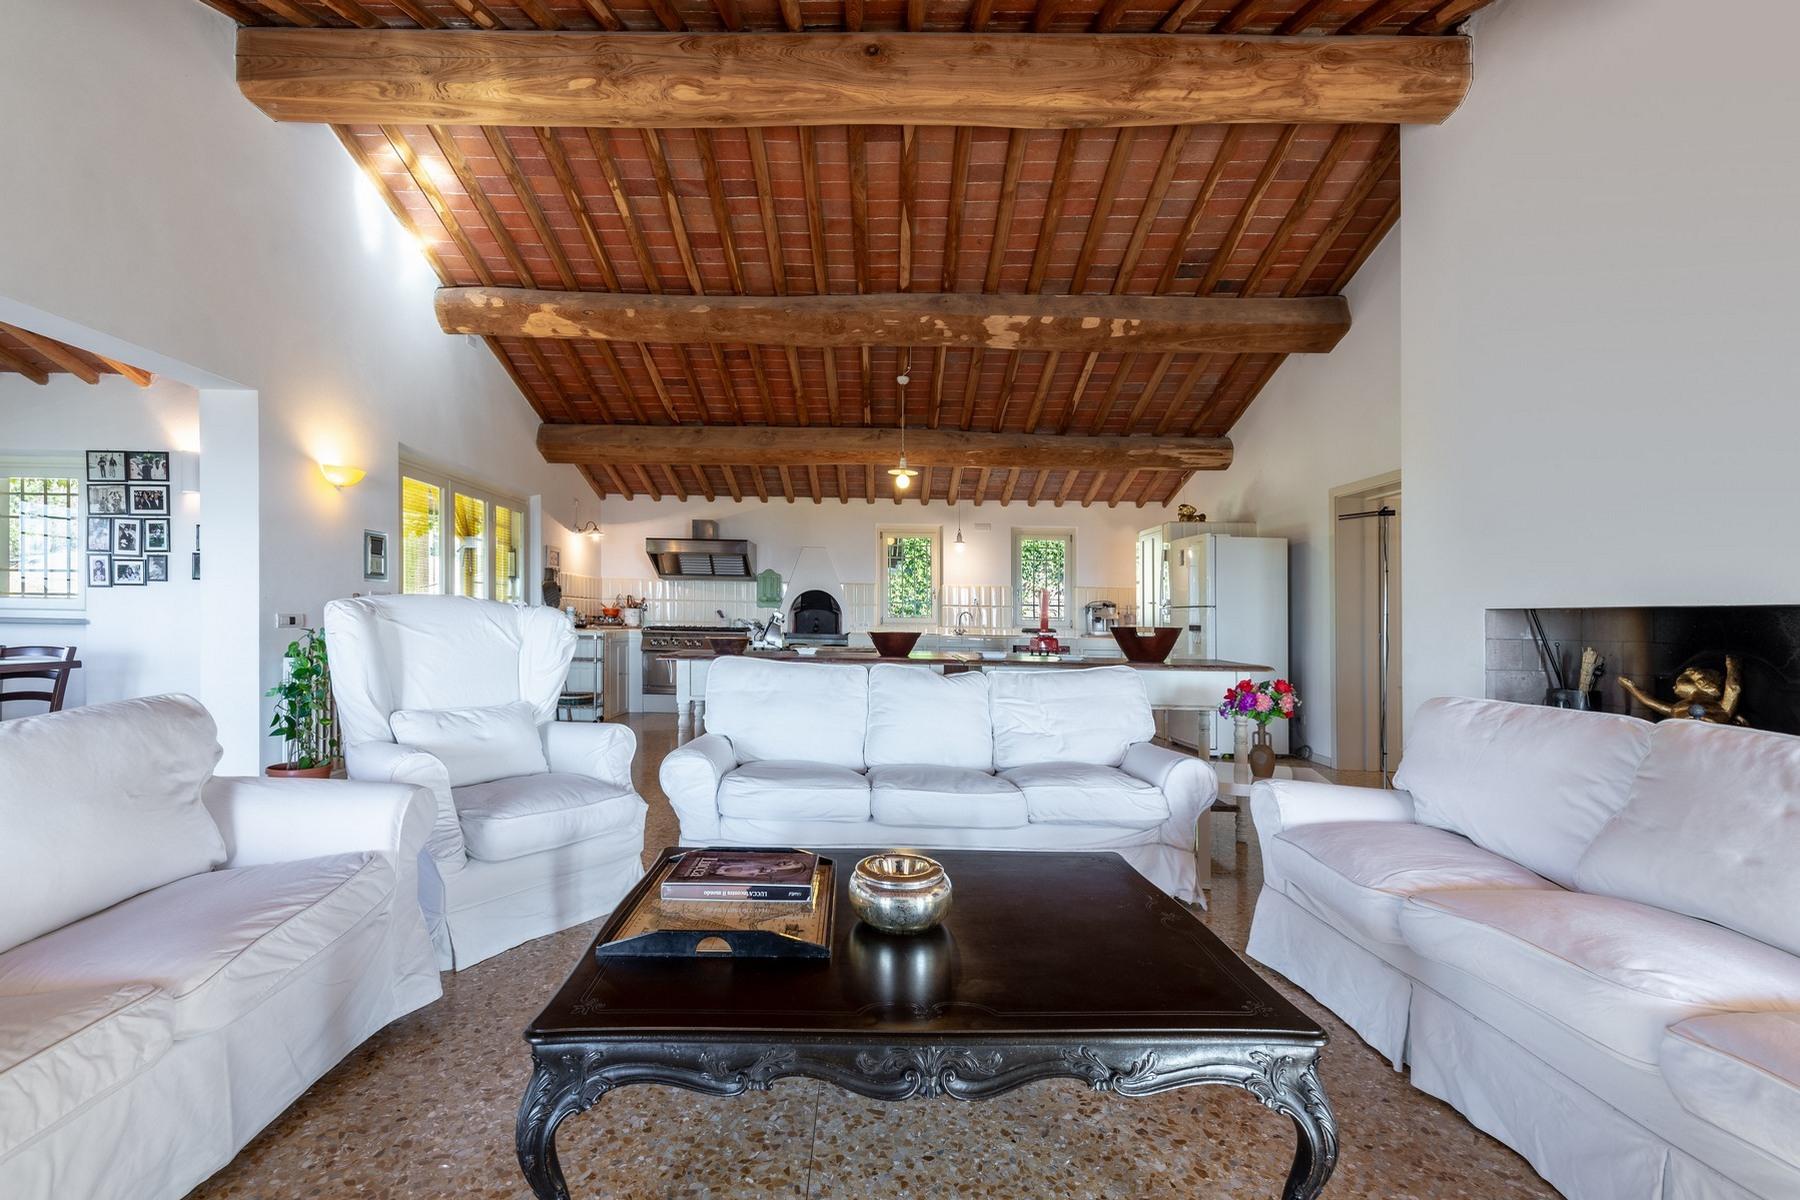 Superb villa with pool on the hills of Lucca - 5